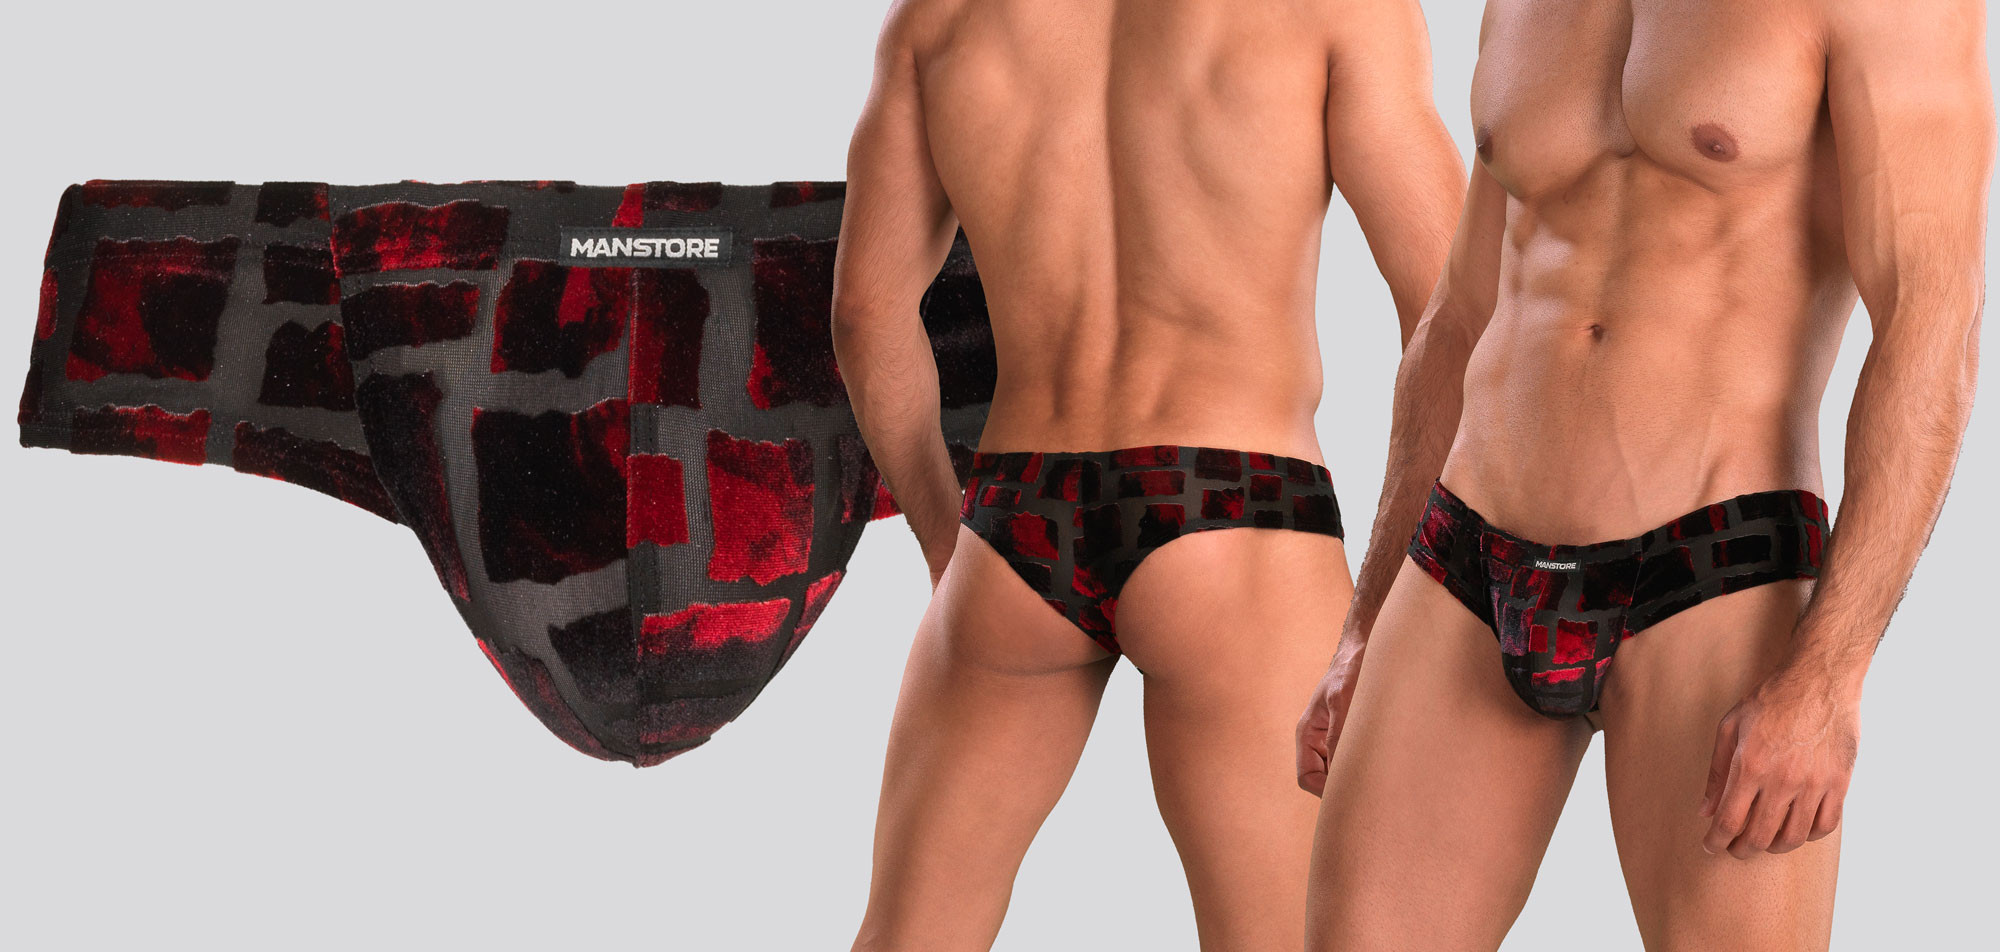 Manstore M2102 Cheeky Brief, color Nee